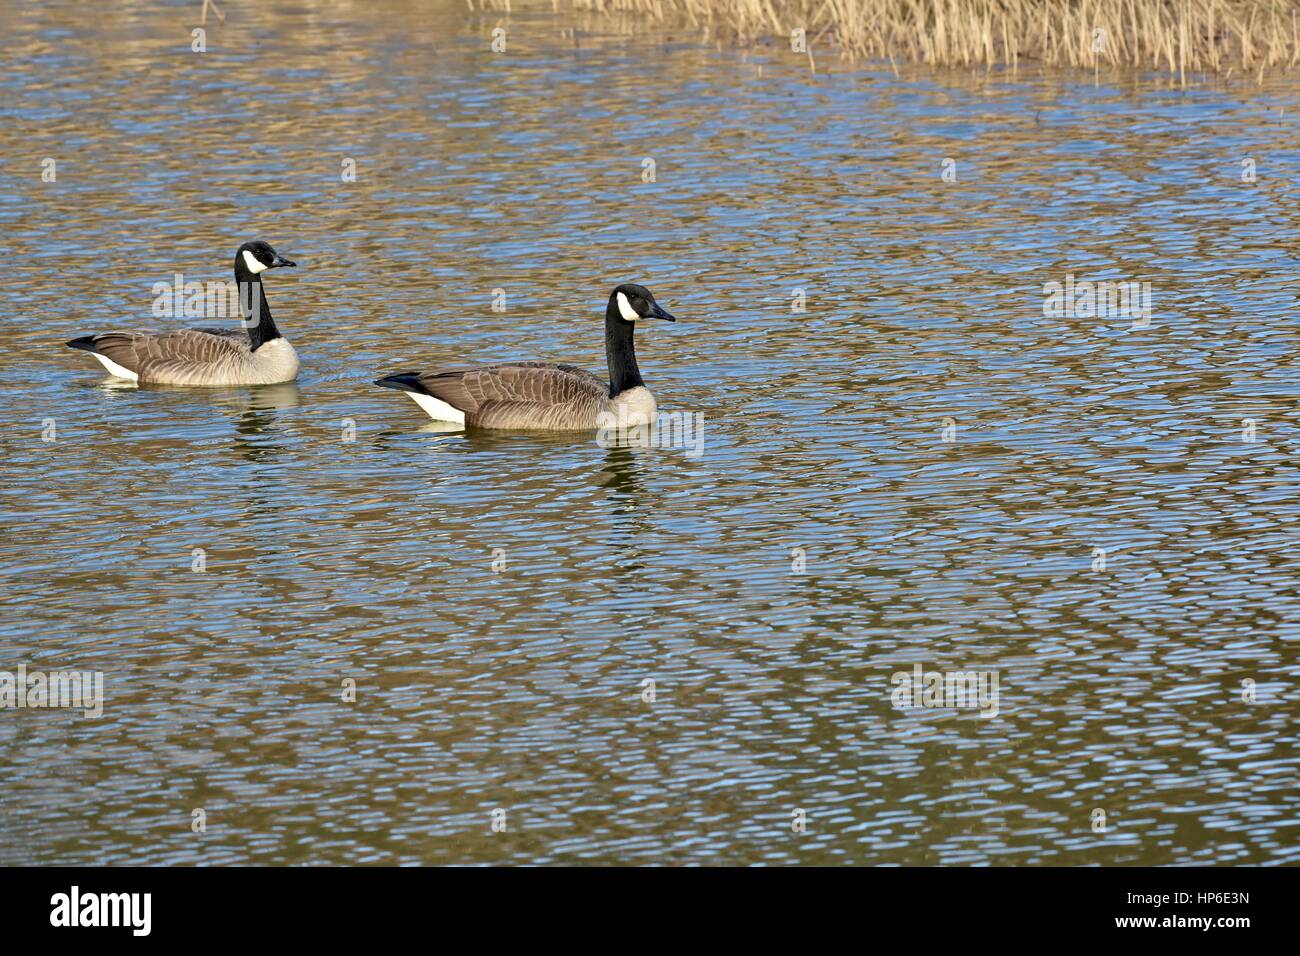 Two Canadian geese (Branta canadensis) in the wild Stock Photo